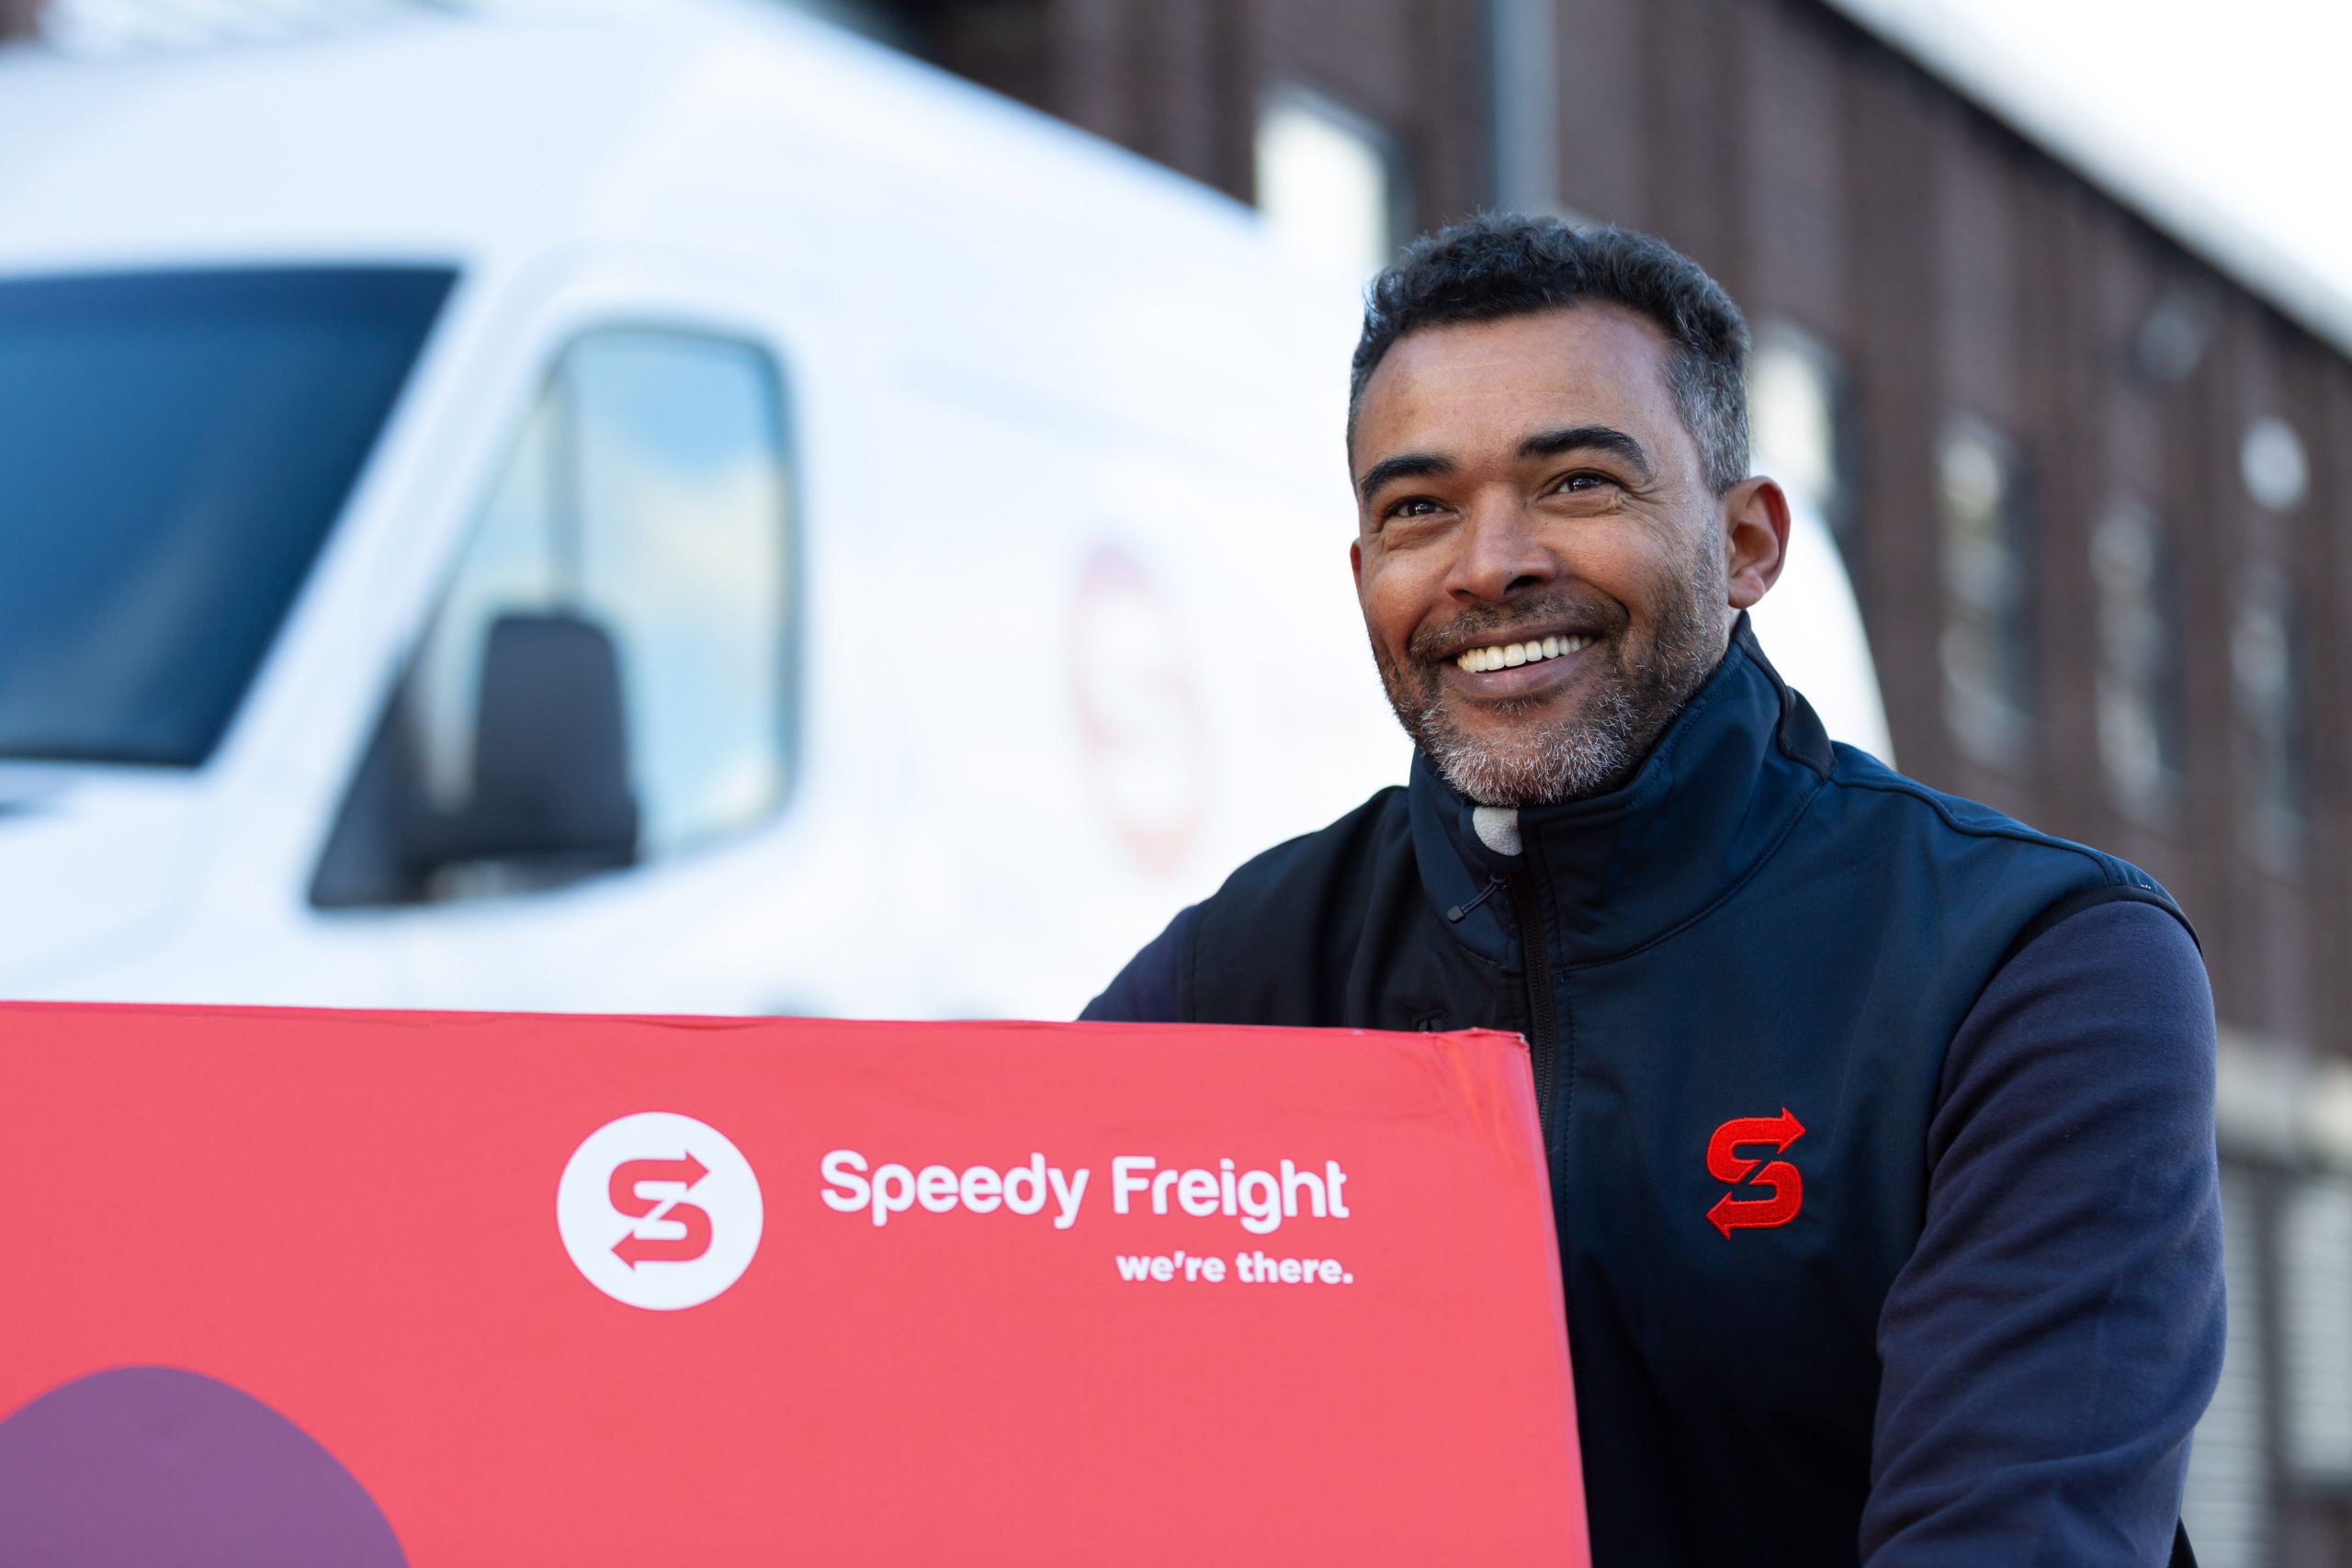 Speedy Freight Same Day Delivery Driver.